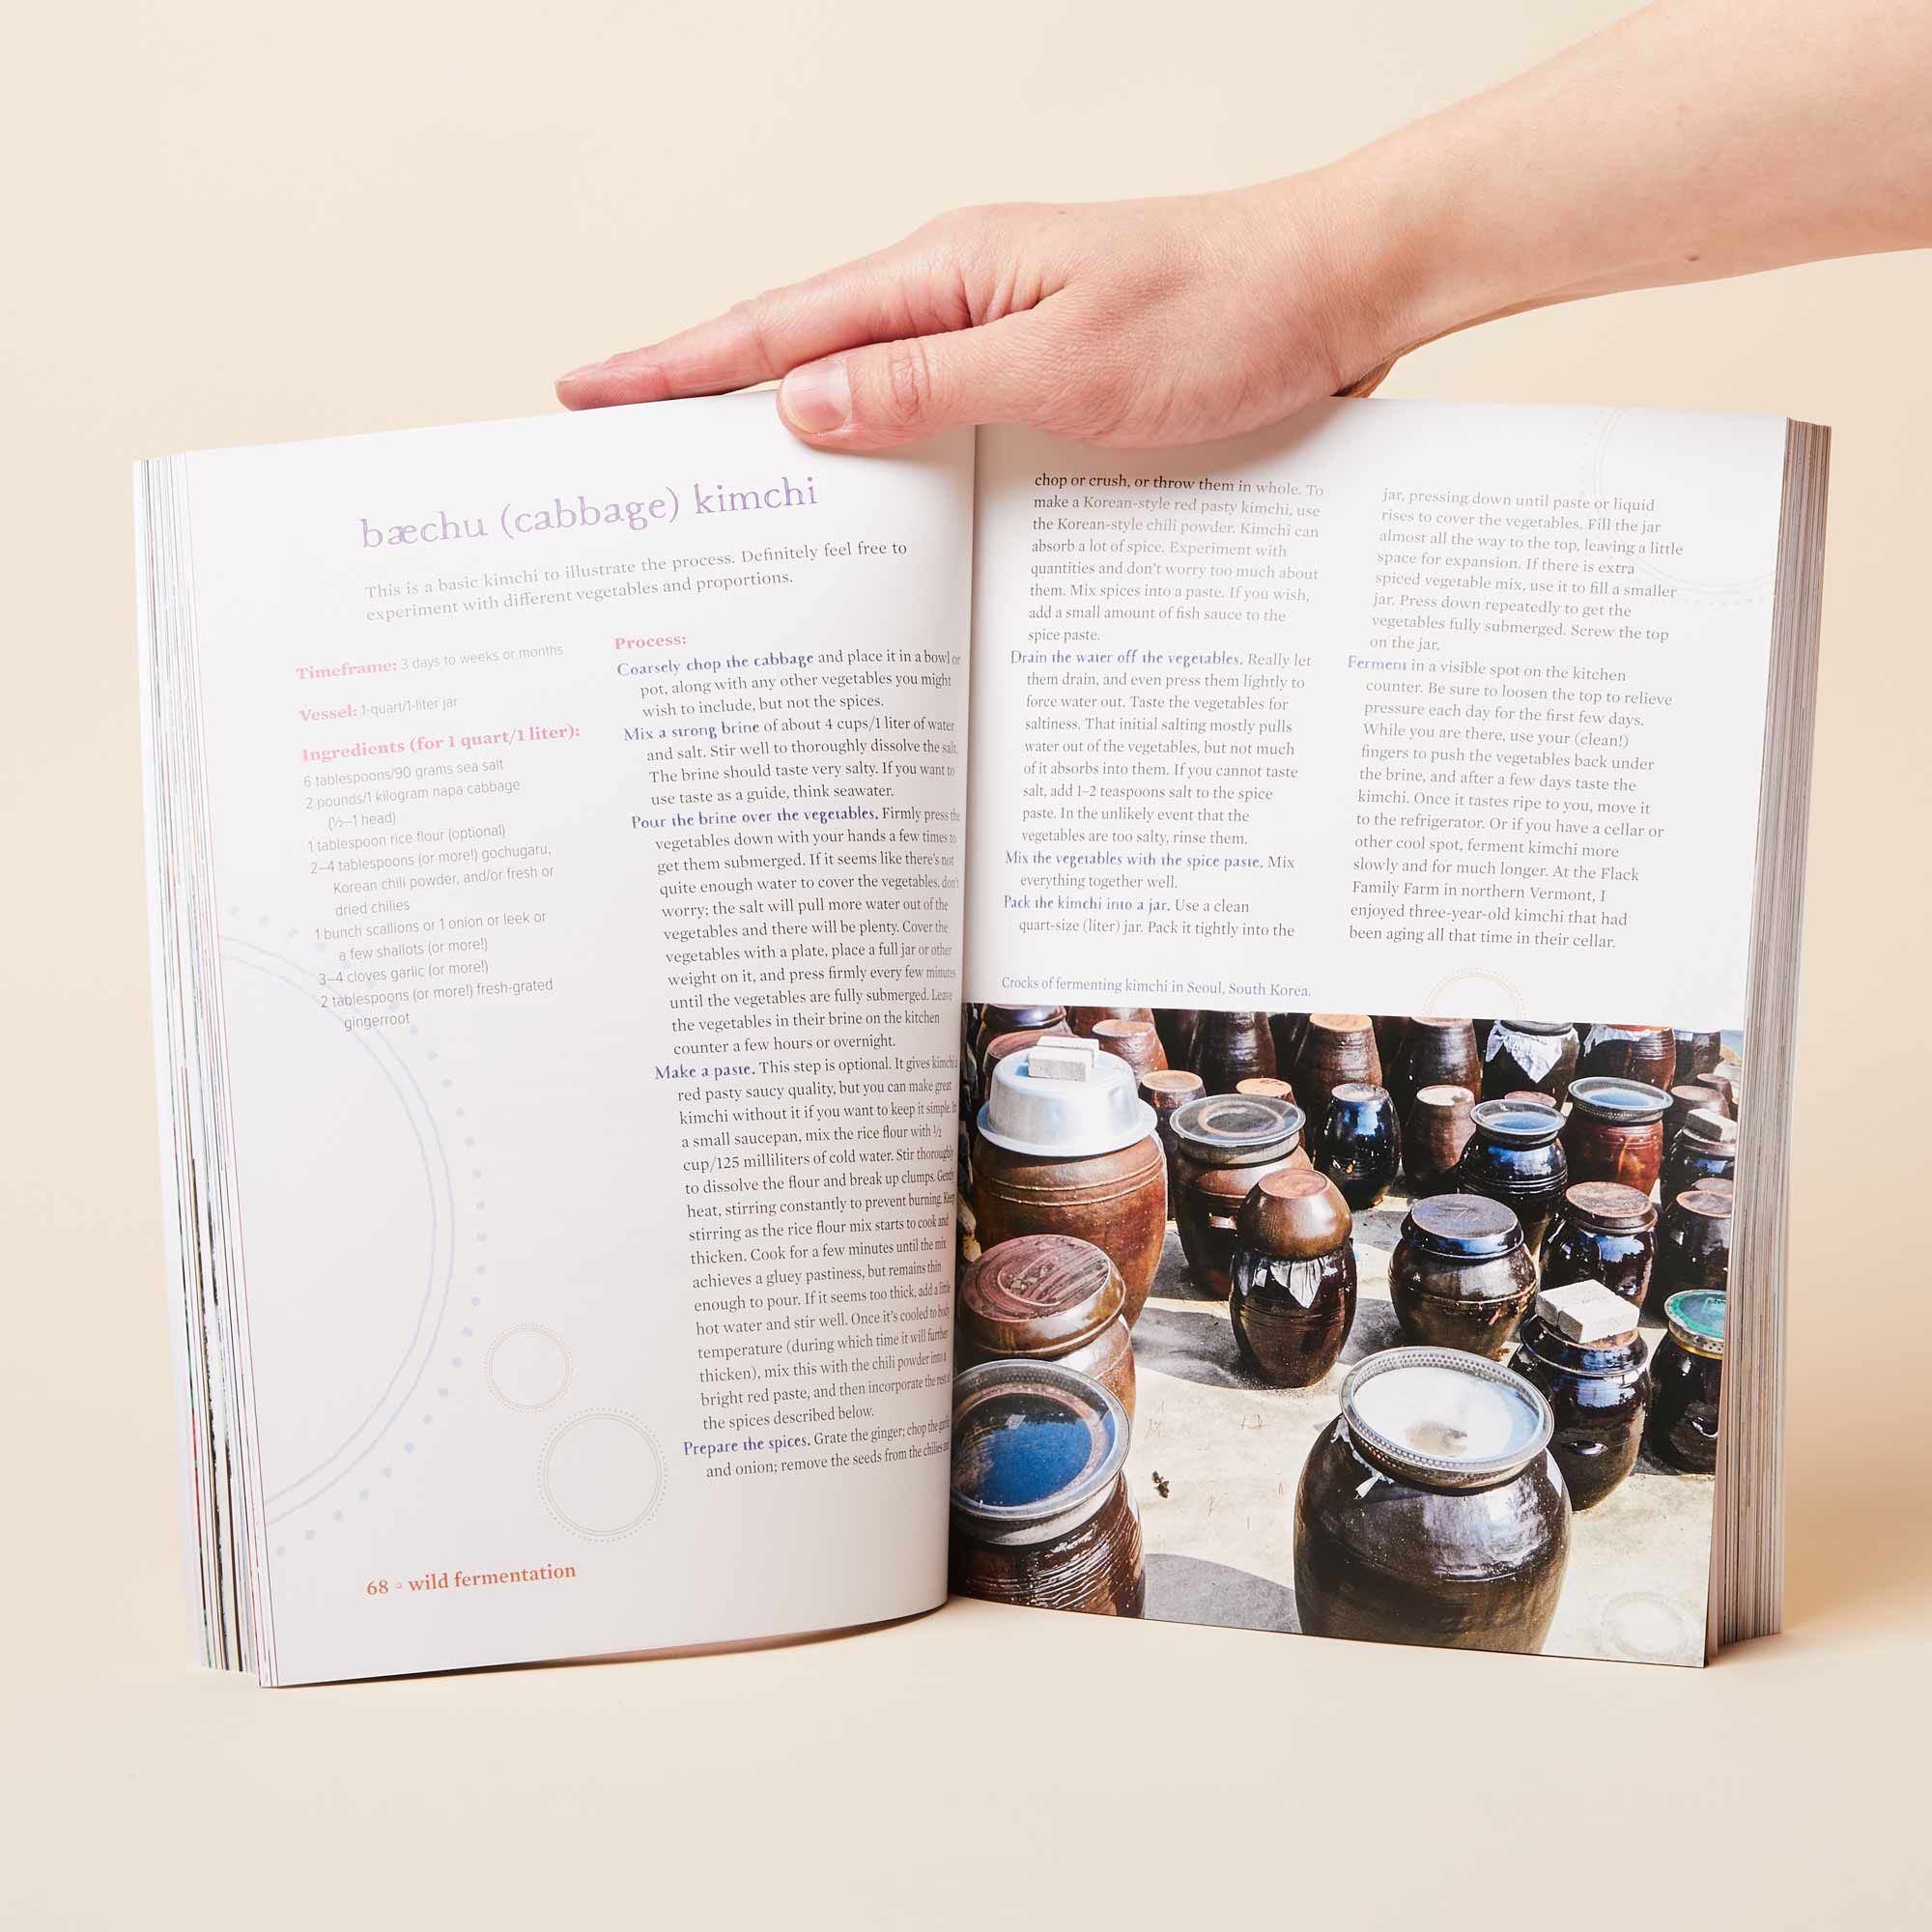 Two-page spread from the book on the topic of kimchi